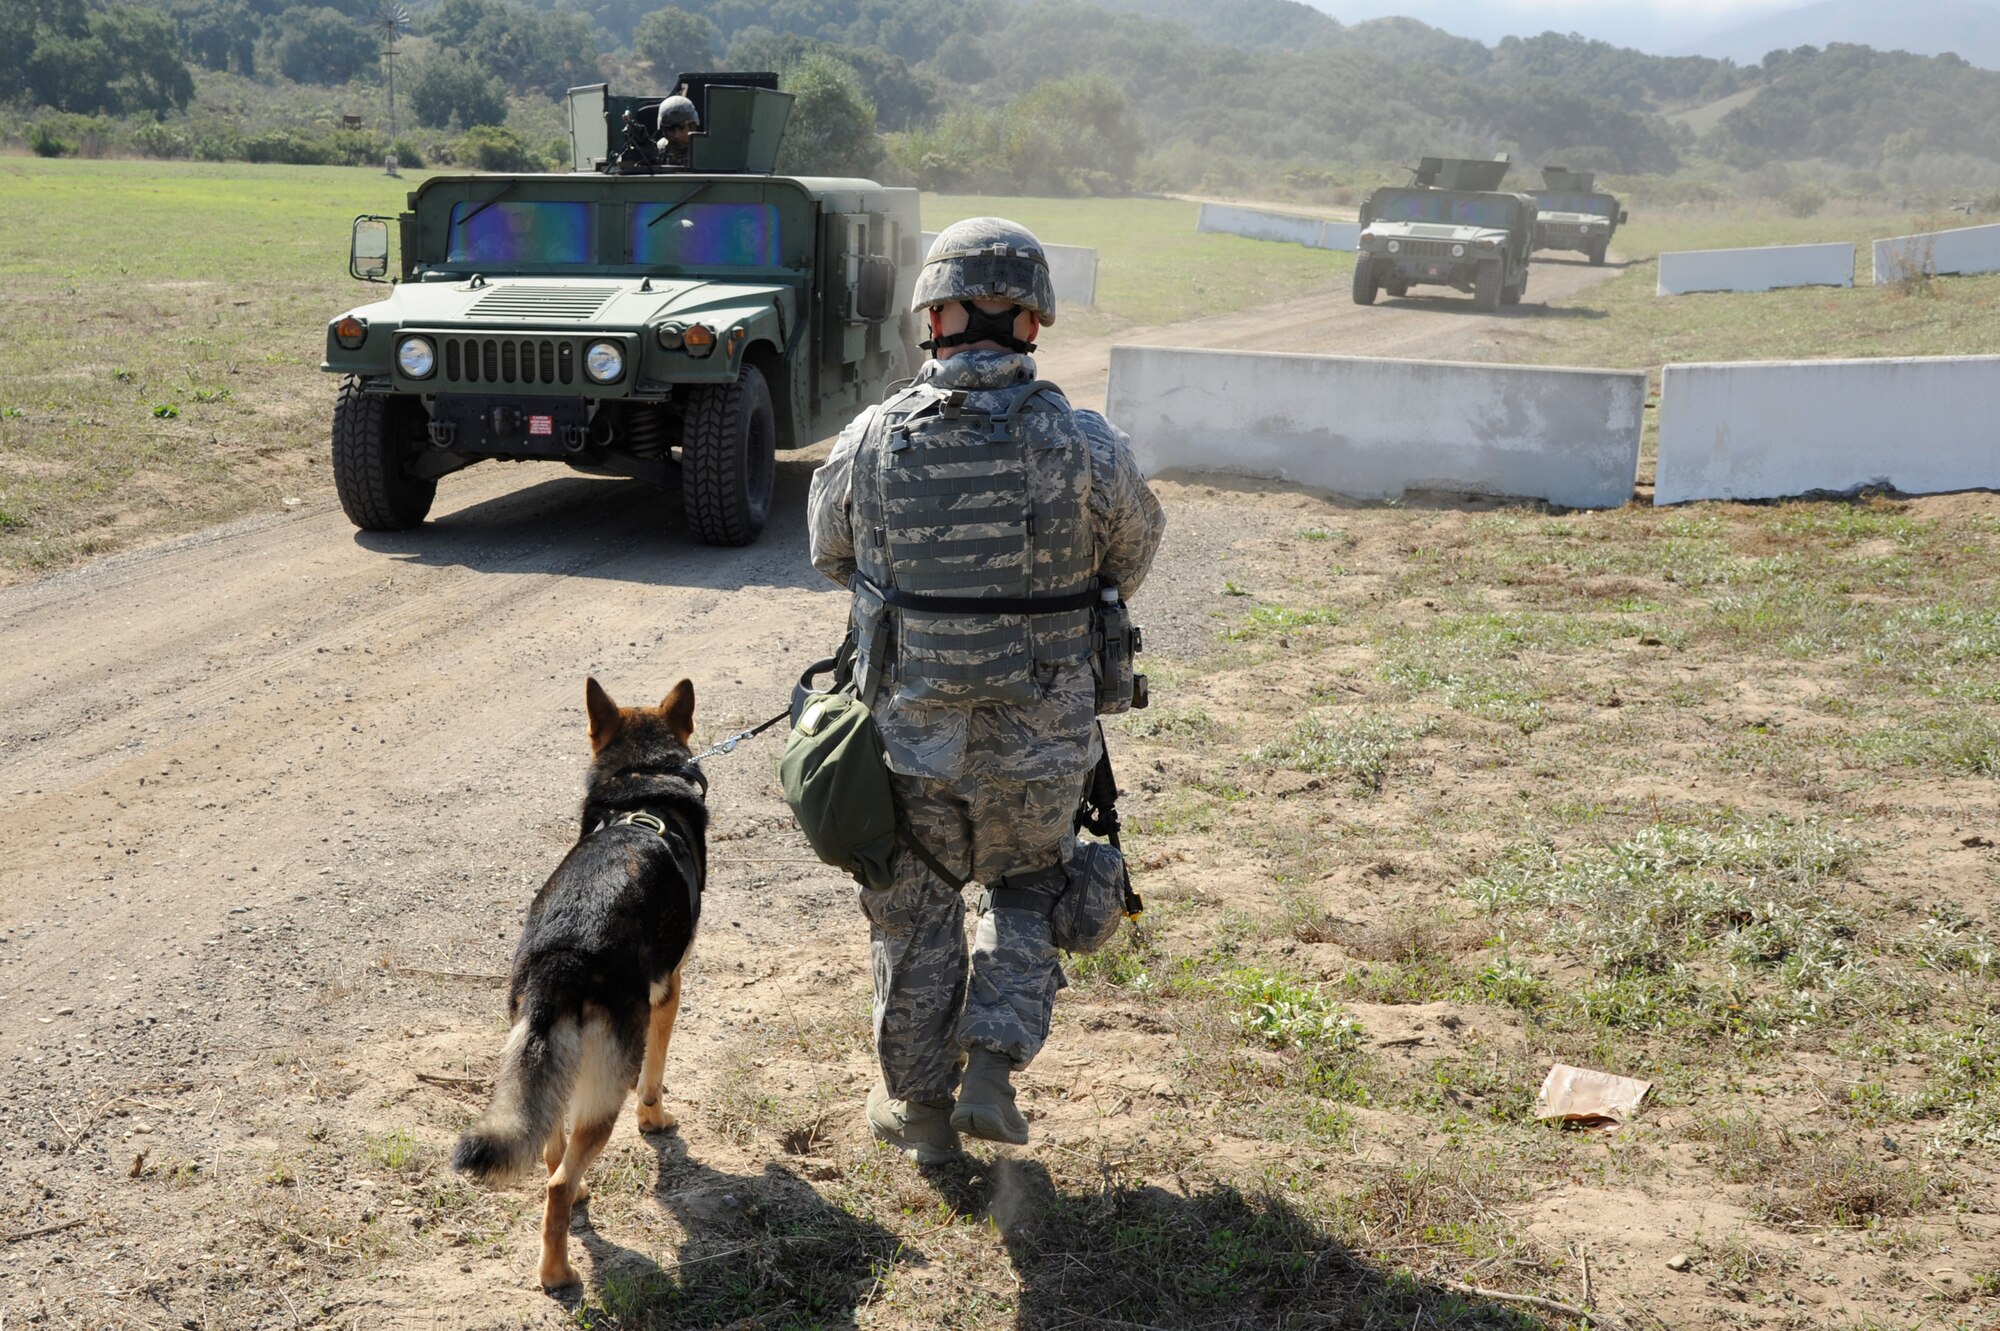 VANDENBERG AIR FORCE BASE, Calif. -- Staff Sgt. Robert Ford, a 30th Security Forces Squadron dog handler, walks to meet a convoy approaching the gate during a North Star exercise here Thursday, Oct. 20, 2011. The exercise trained Airmen during a simulated deployed environment in which they practiced deployment training and response time.   (U.S. Air Force photo/Senior Airman Lael Huss)